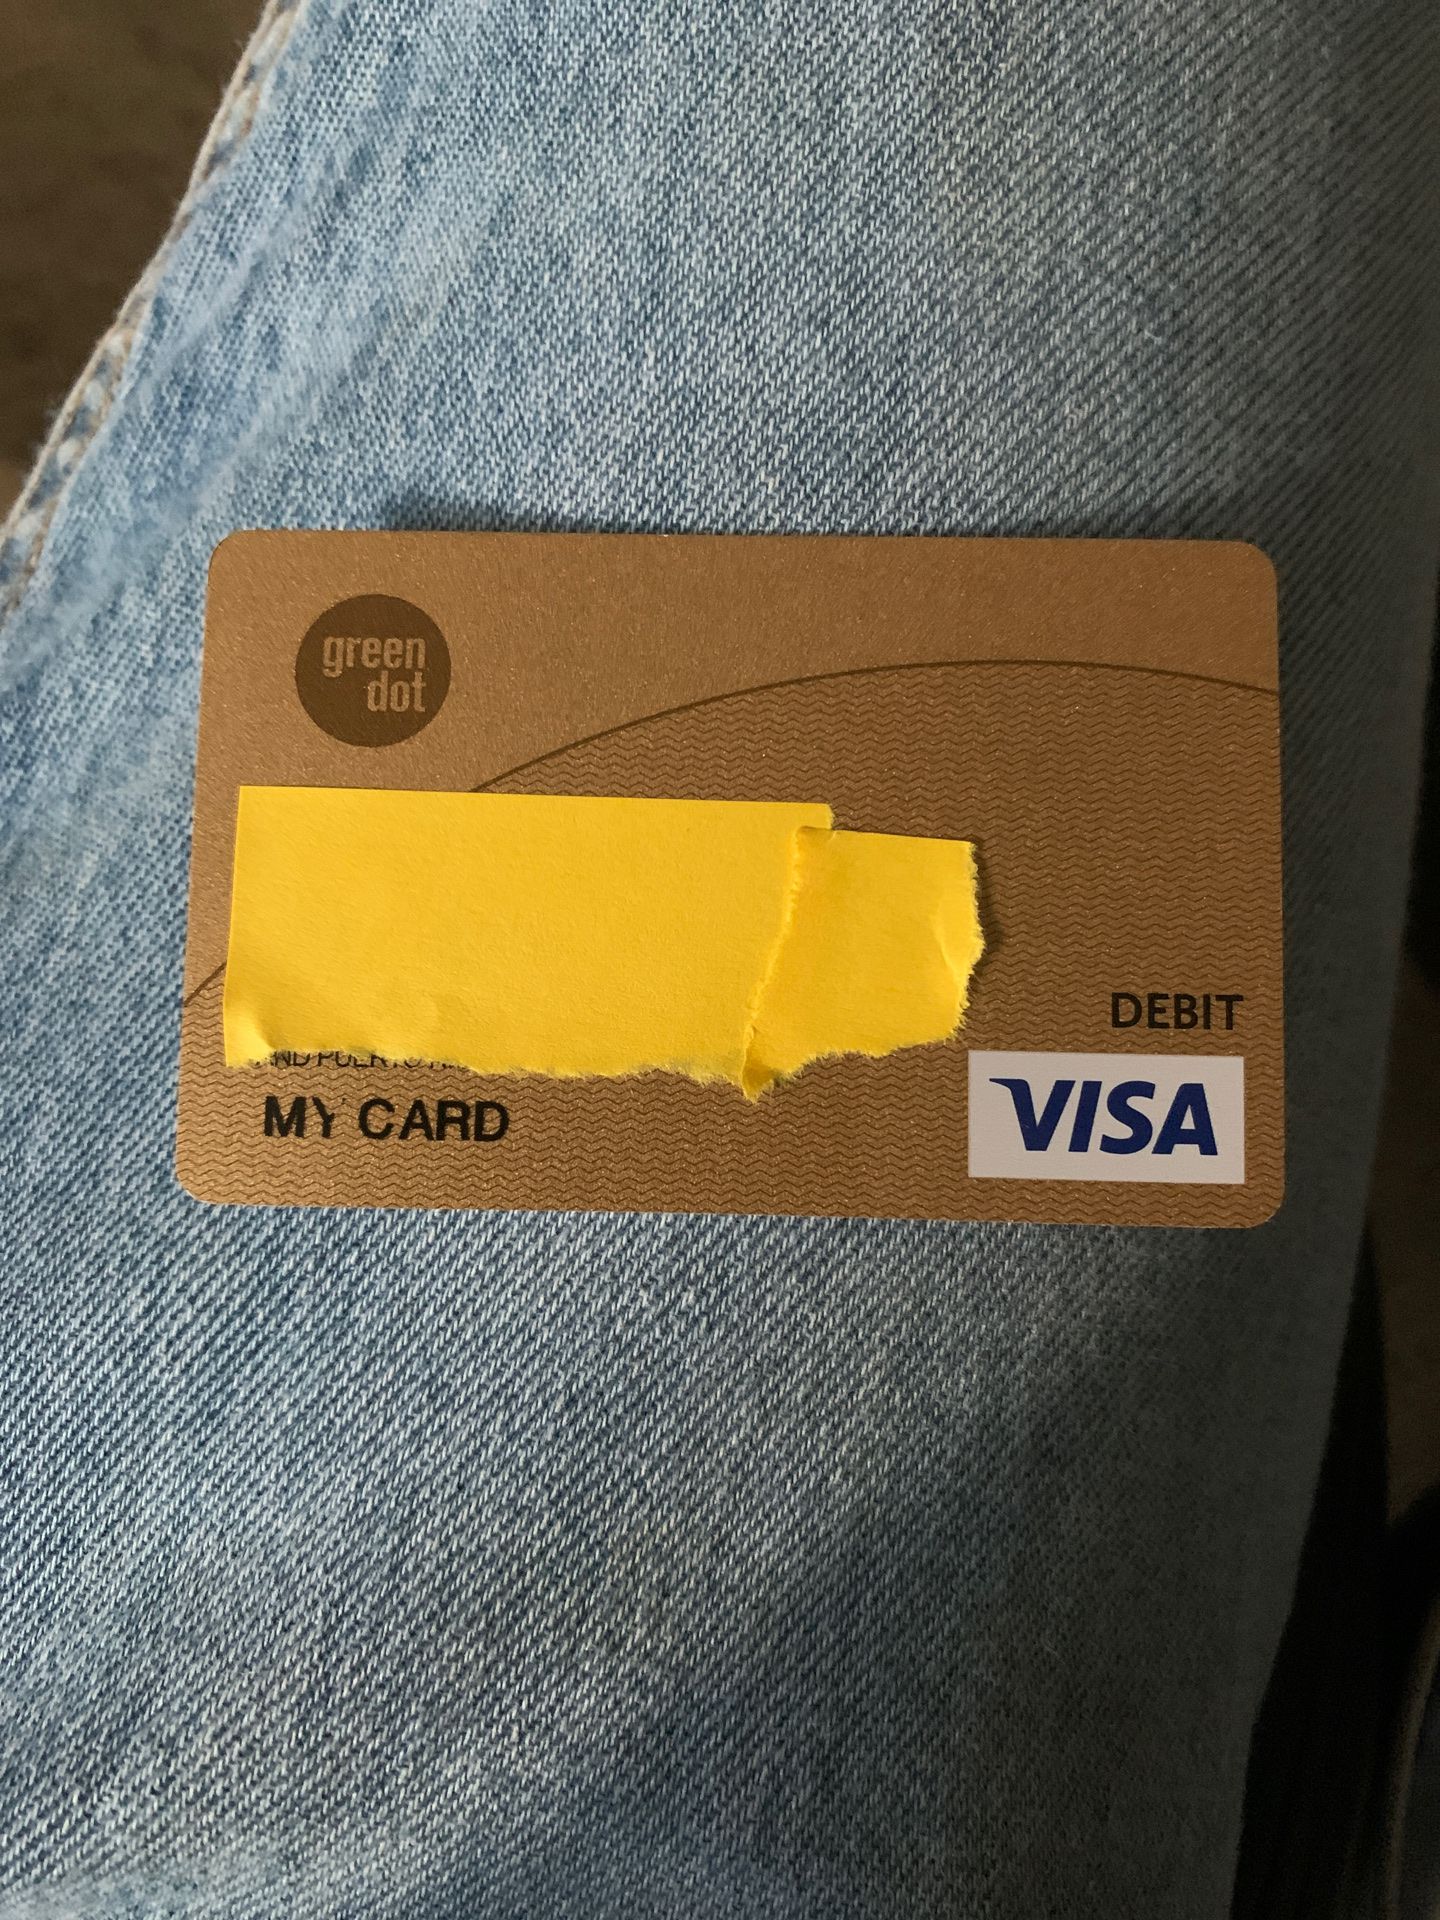 Green dot card with $20